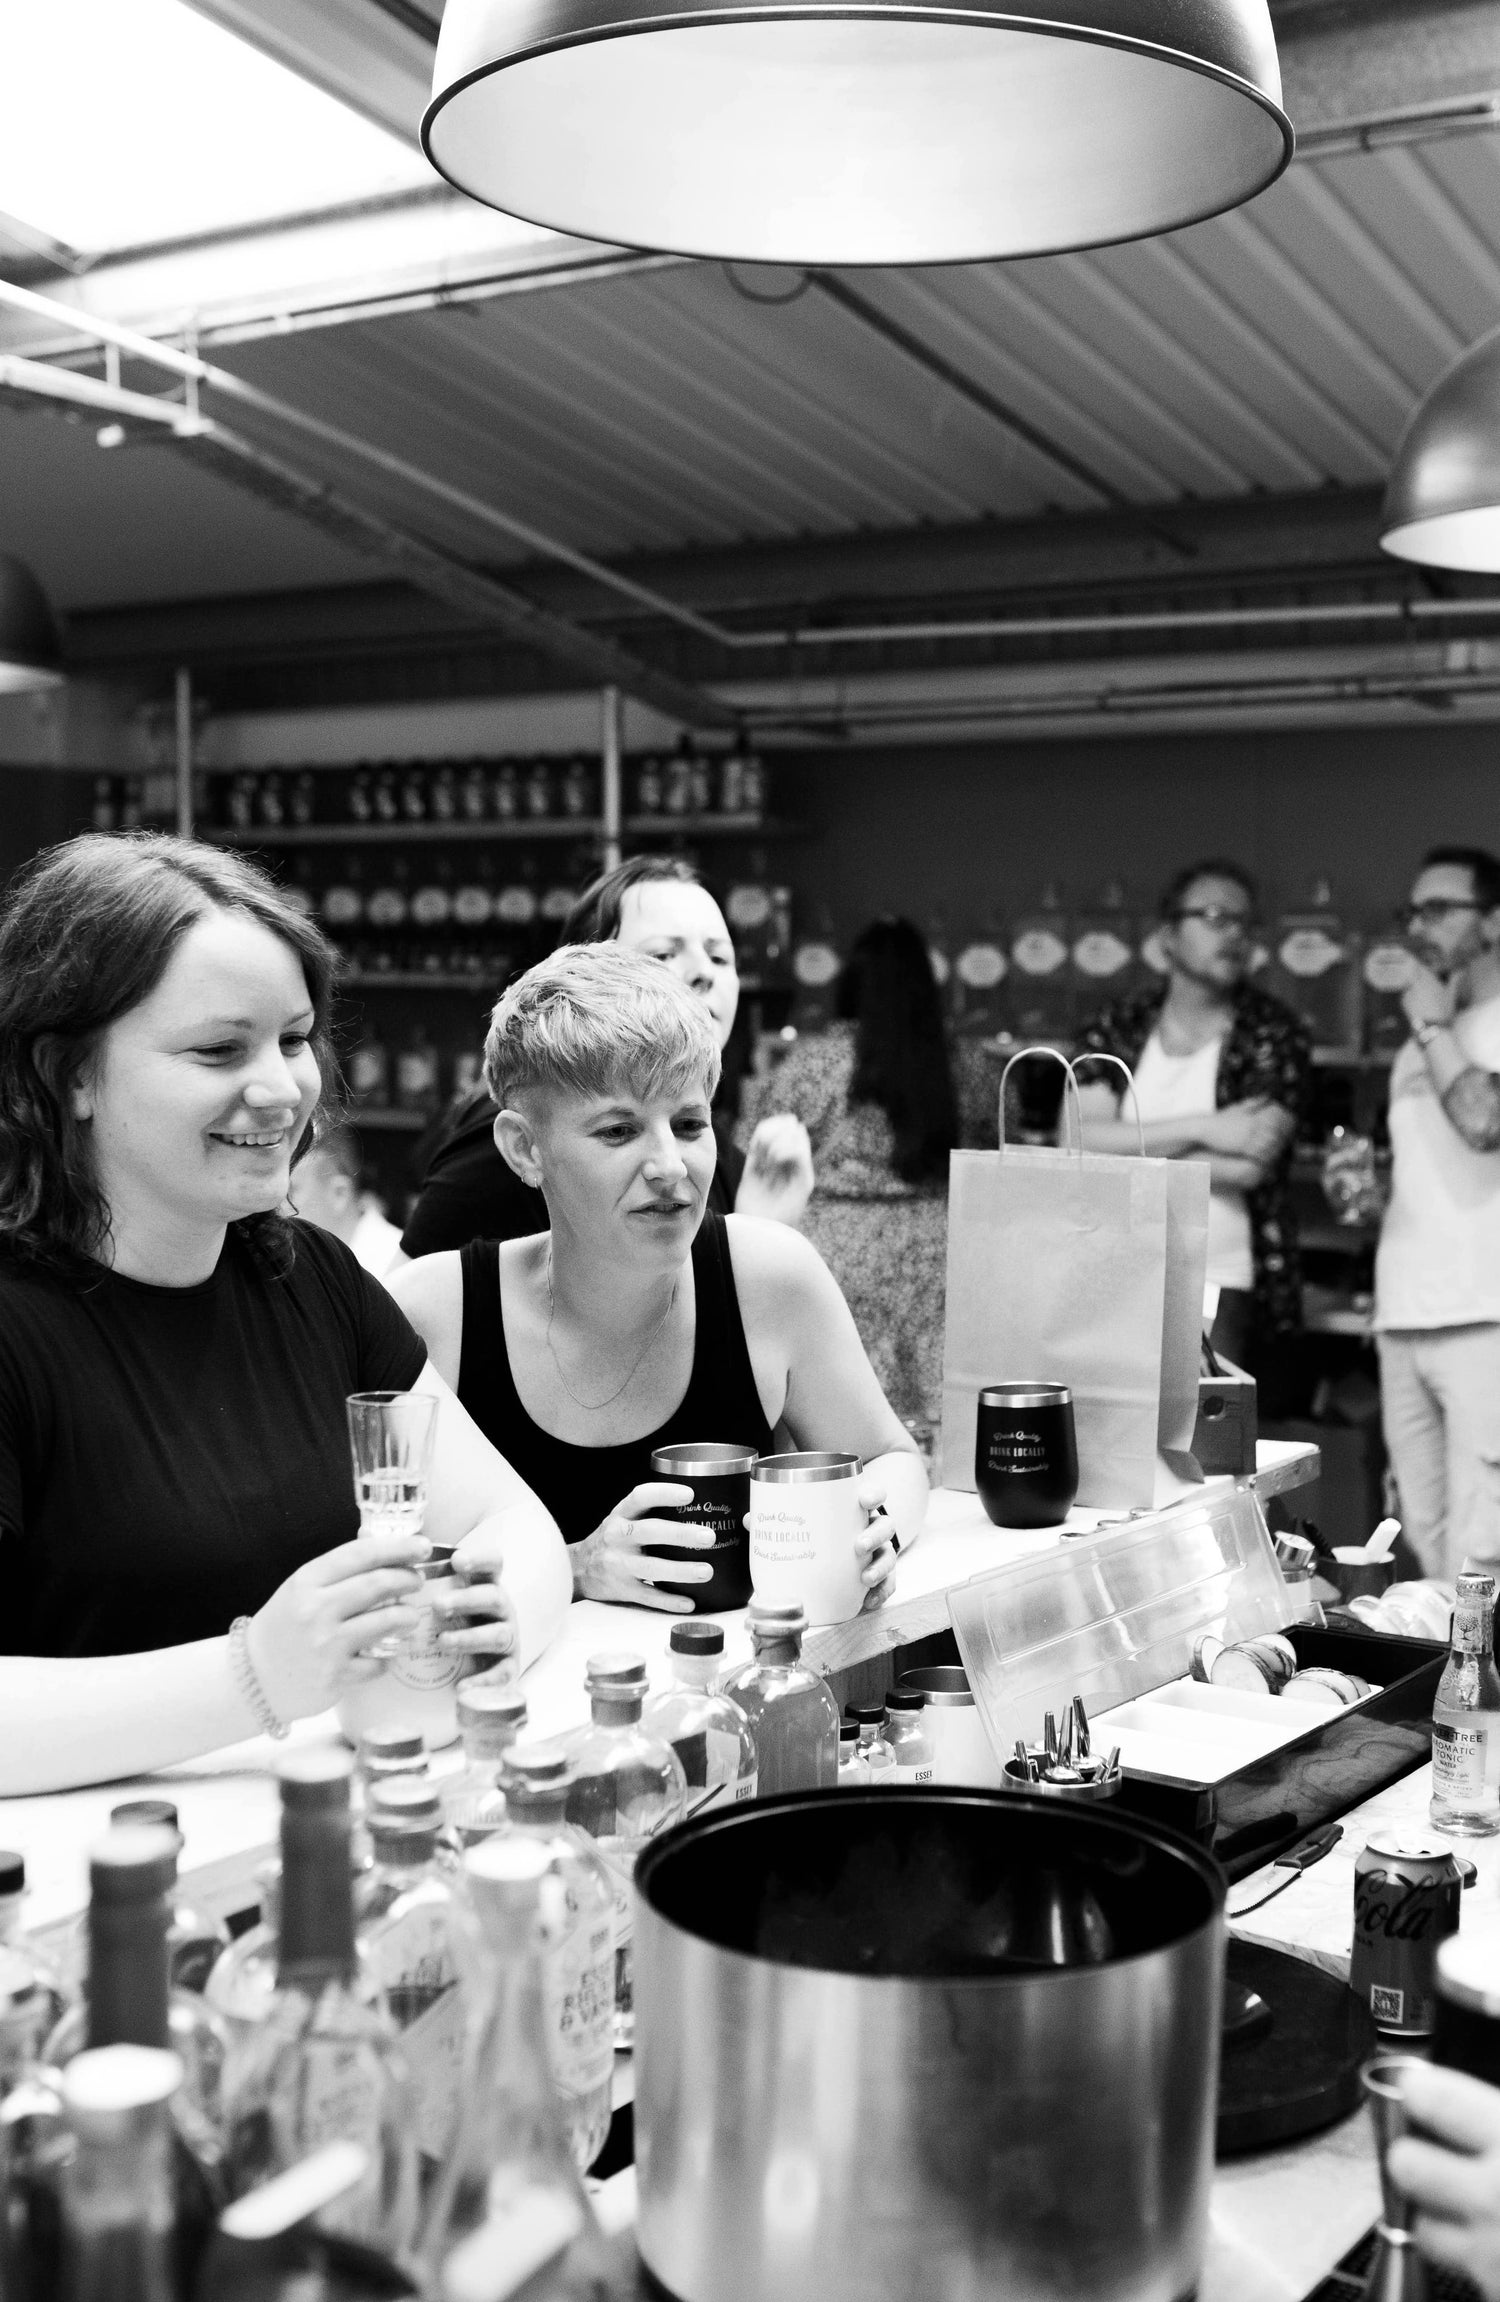 People involved in a Make Your Own Spirit event at The Essex Distillery